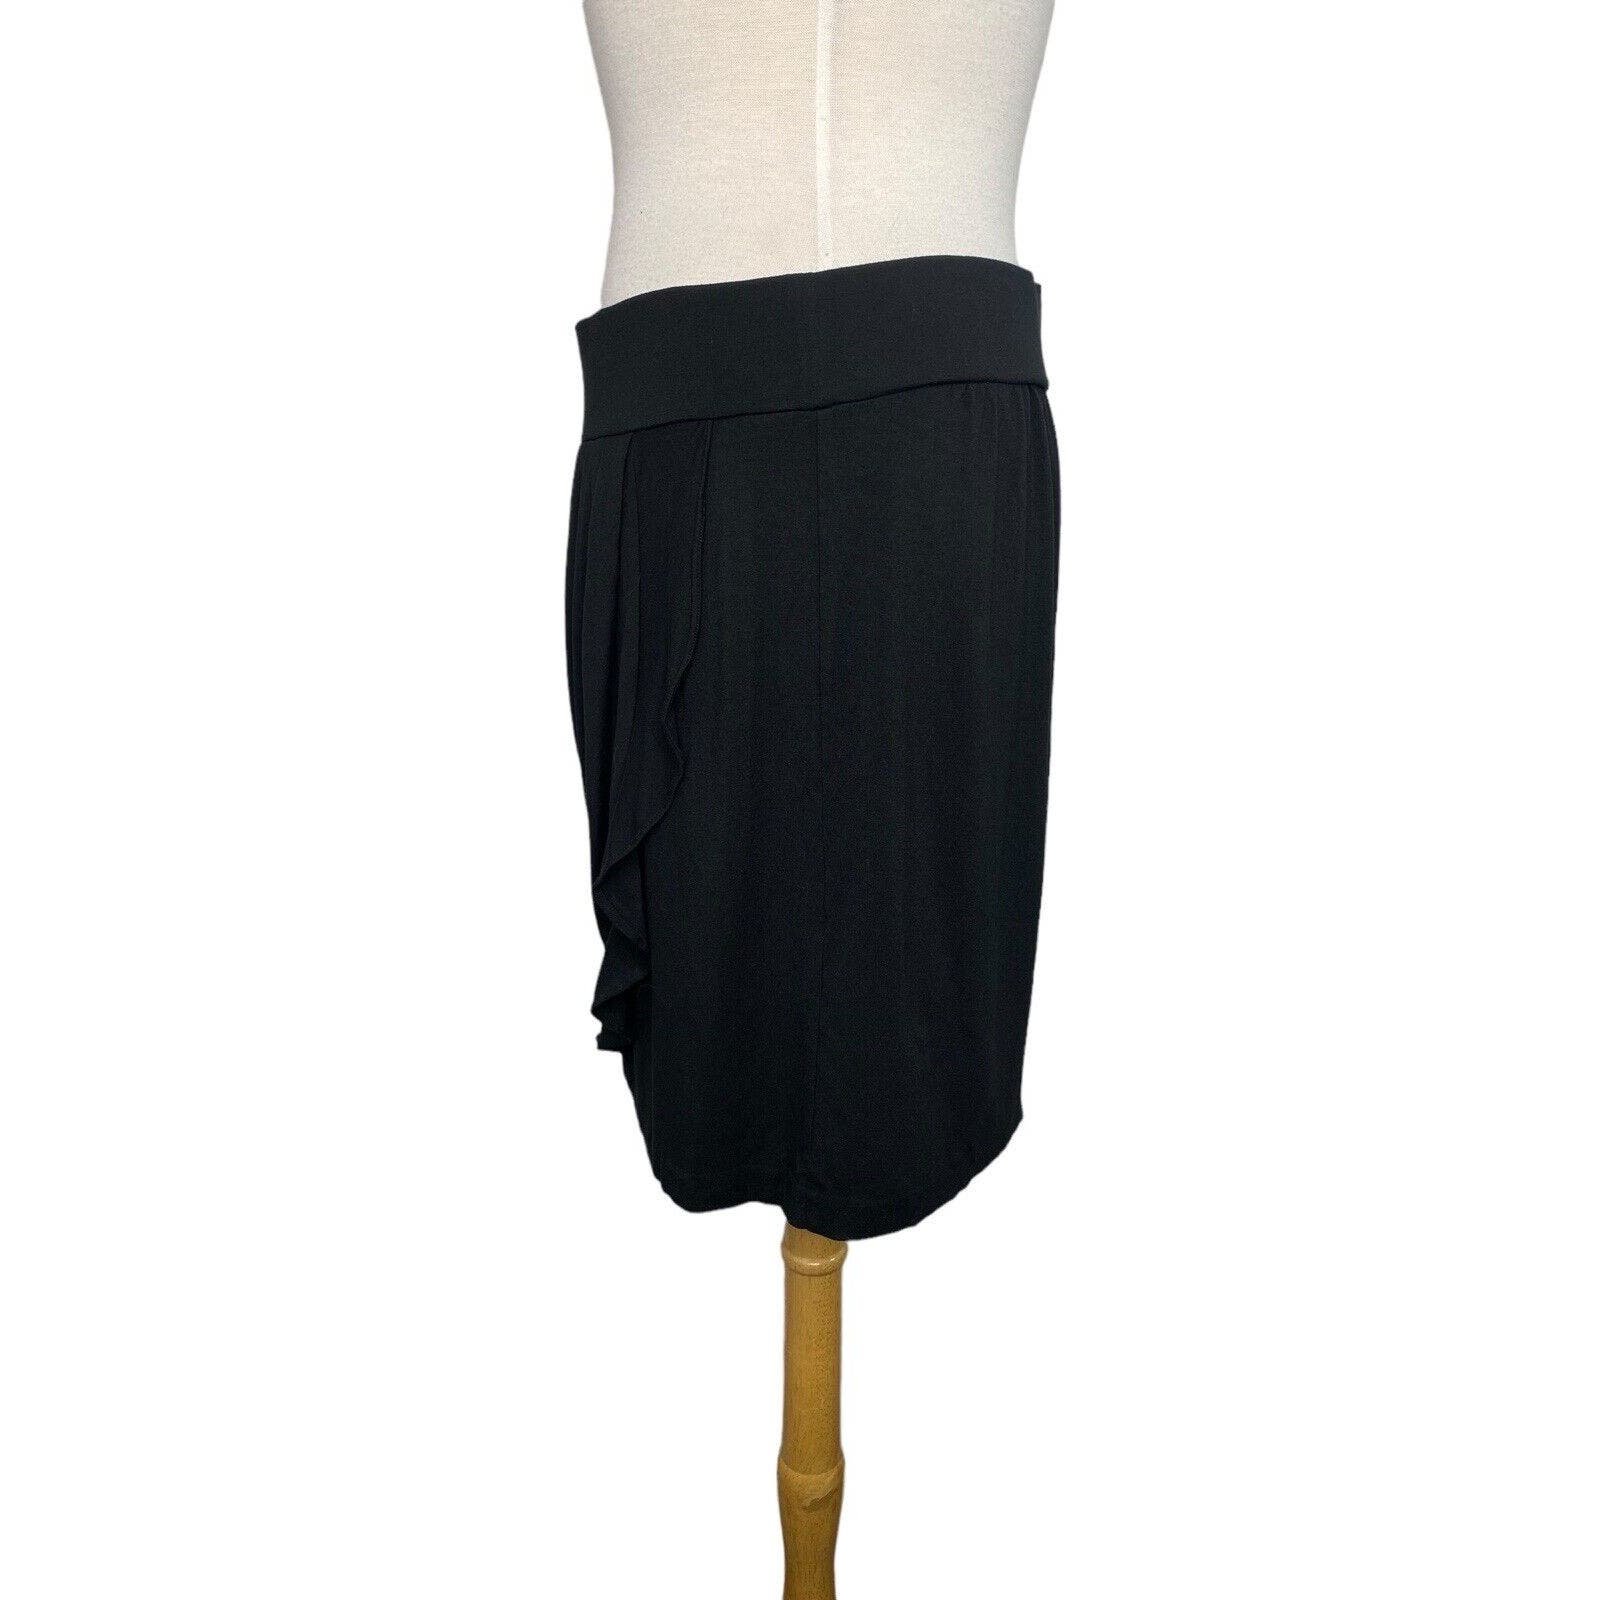 Discounted LOFT Black Pull On Faux Wrap Ruffle Skirt Size Medium Mini Coverup Modal P6zPTgg8V just for you